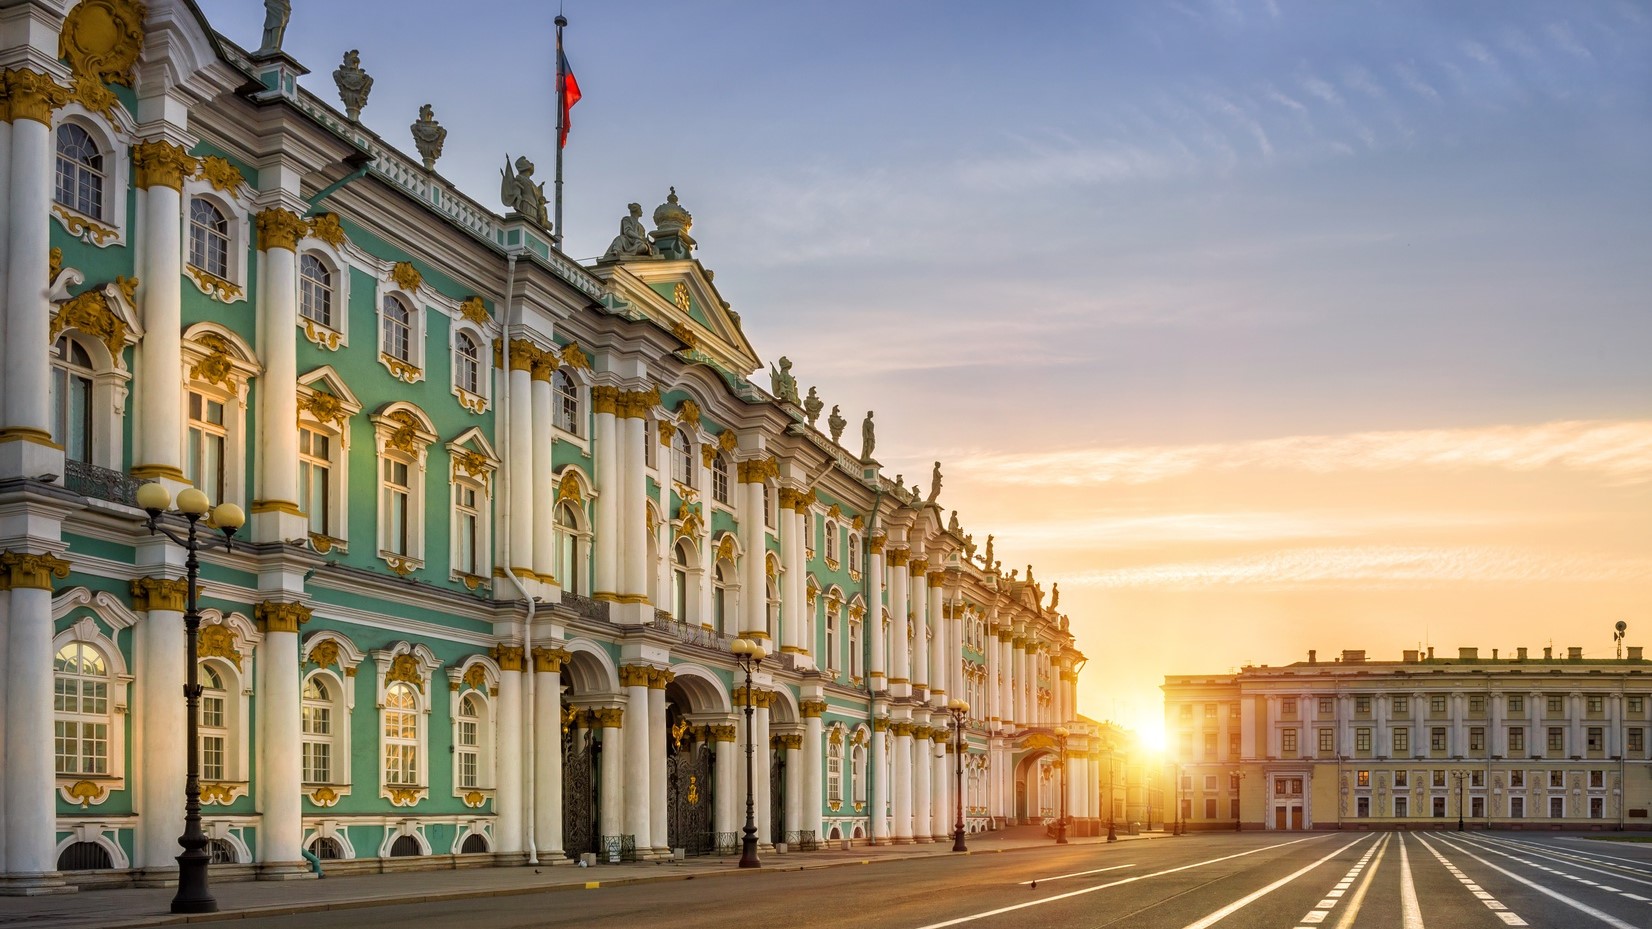 St. Petersburg, the State Hermitage Museum (the Winter Palace)